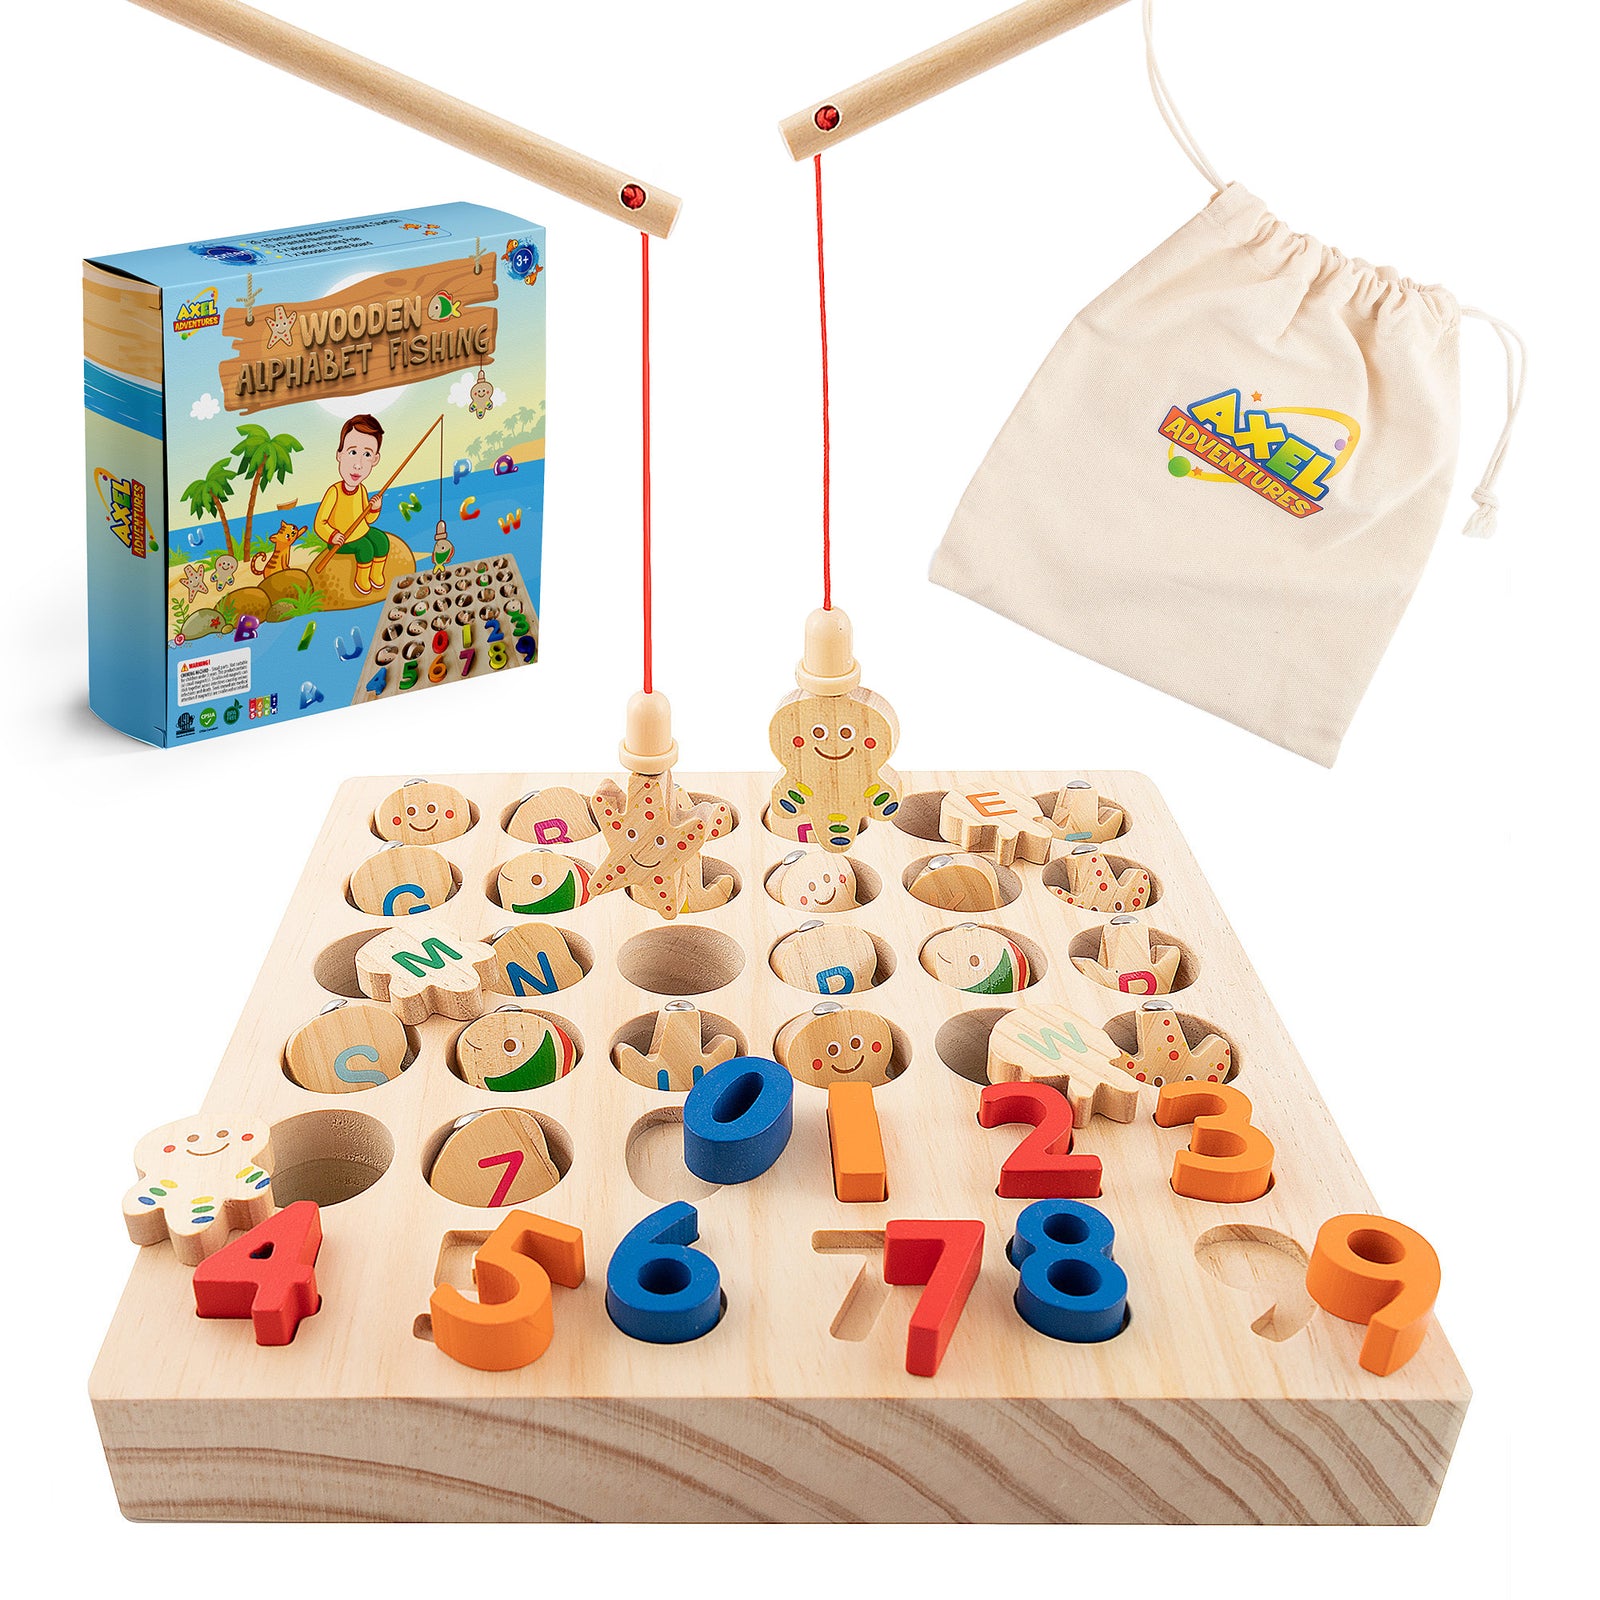 Wooden Magnetic Fishing Game For Kids magnet Fishing Toy Gift For Children